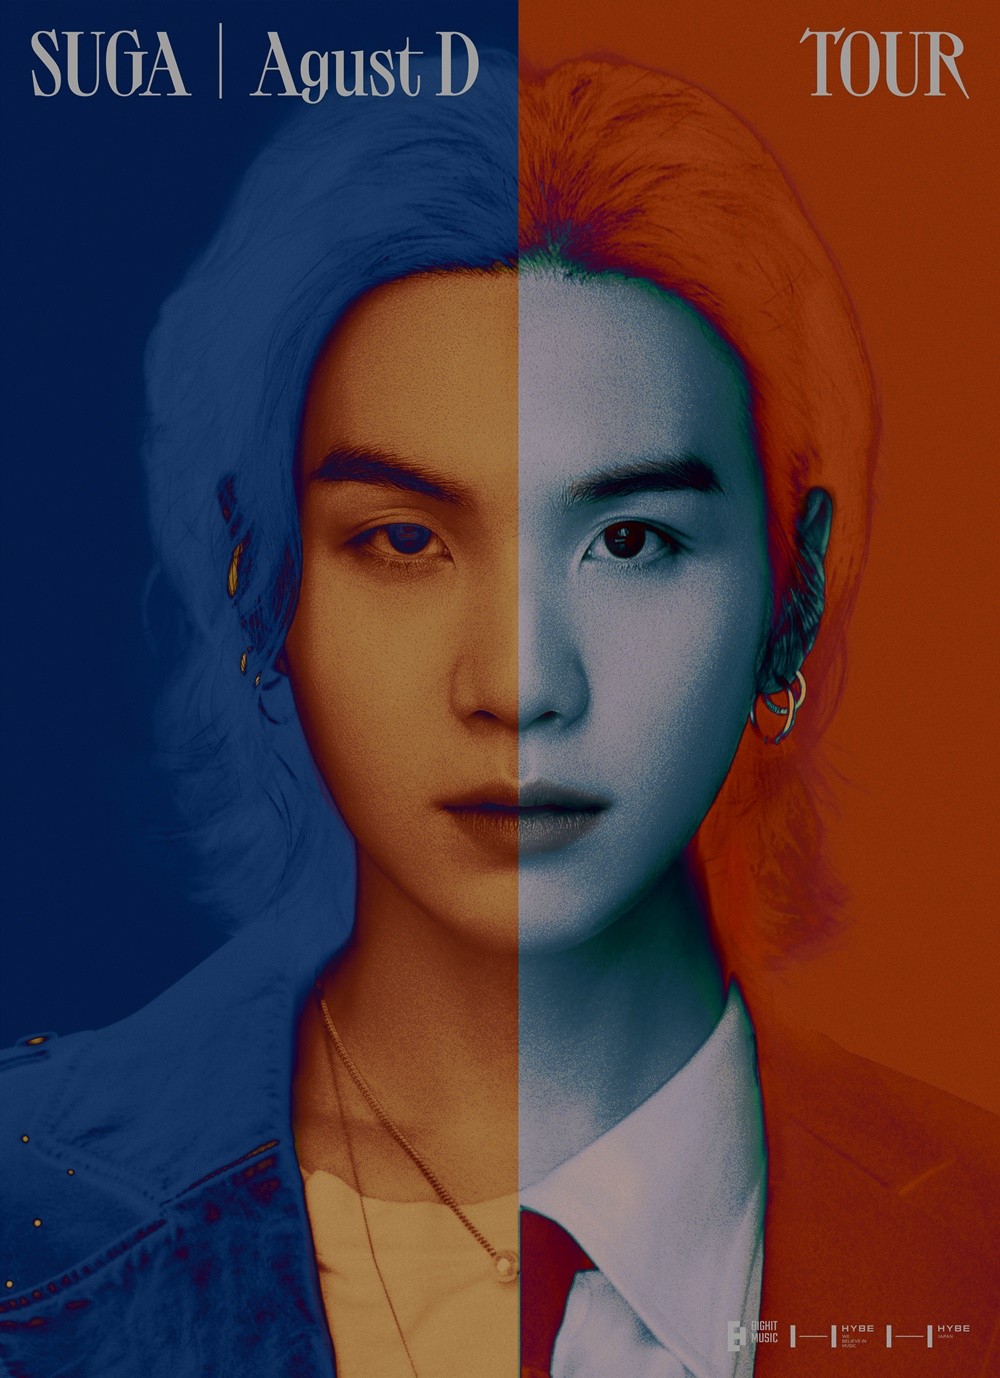 Suga Reveals World Tour Poster…"To capture the world, Agust D" DIPE.CO.KR